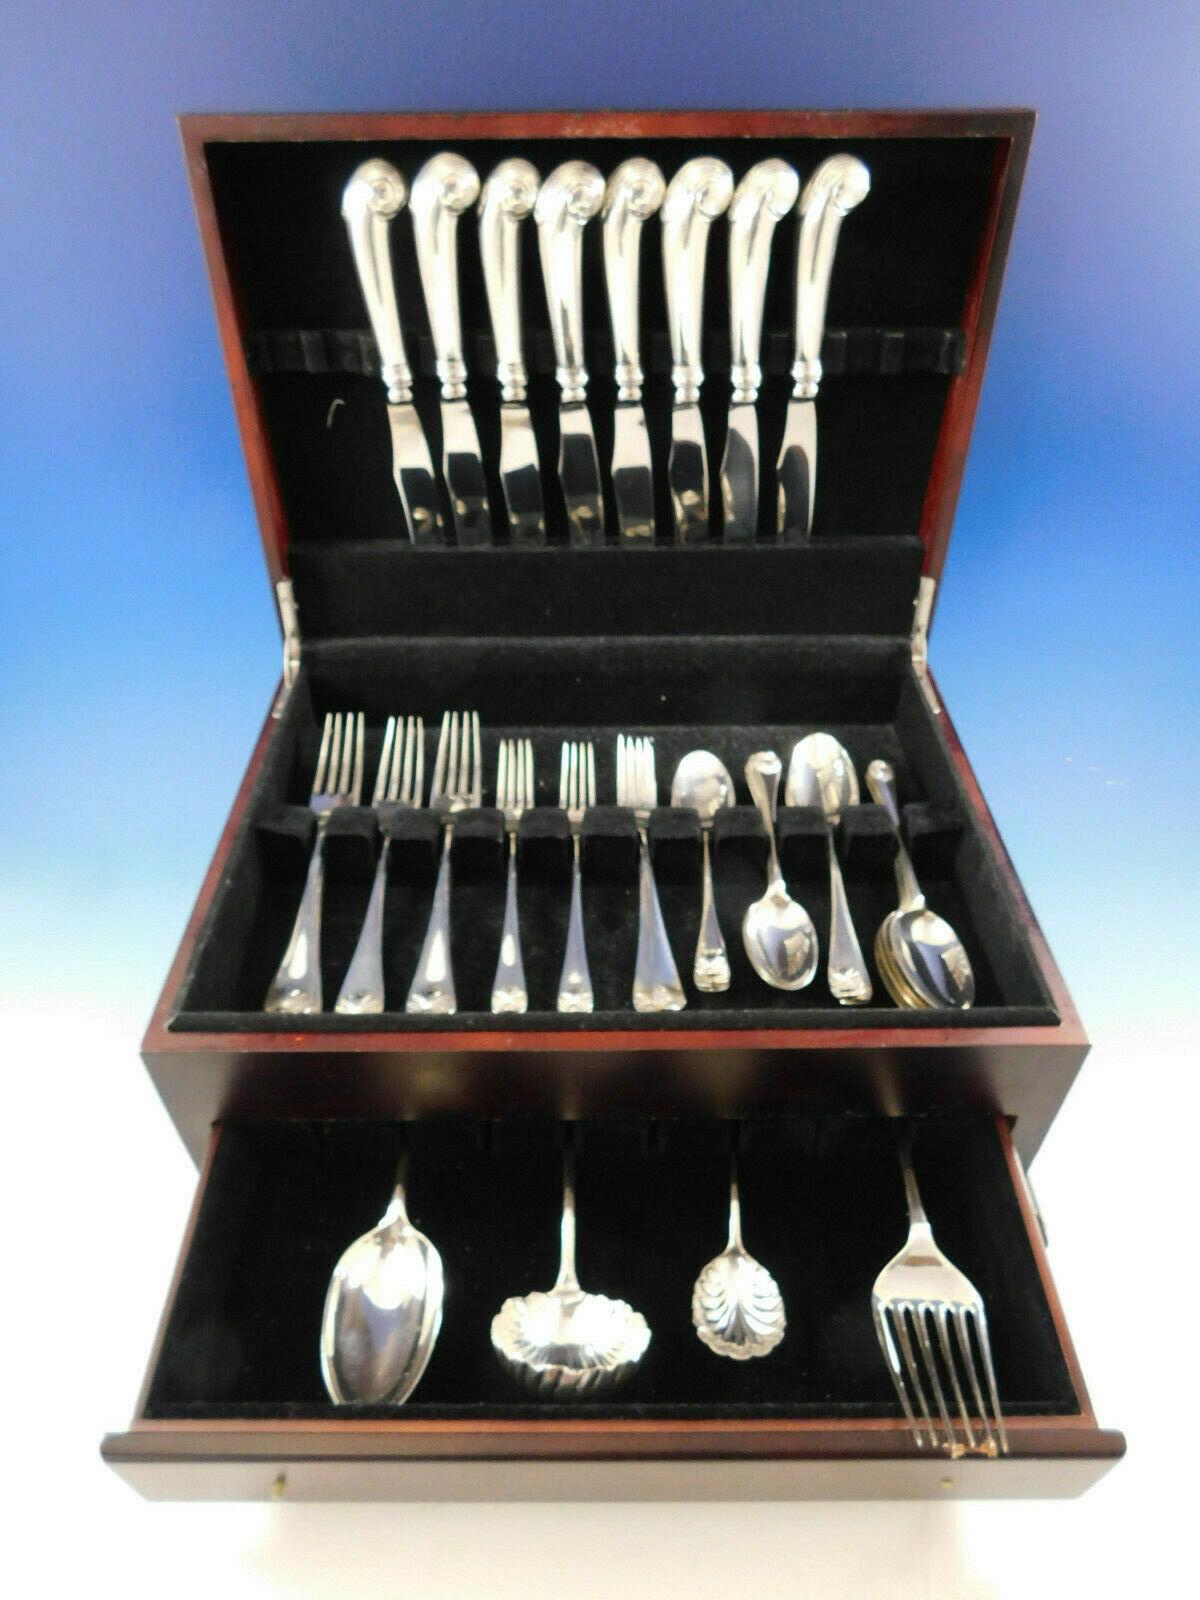 Impressive dinner size Williamsburg Shell by Stieff sterling silver flatware set of 44 pieces. This set includes:

8 dinner size knives, pistol grip, 9 3/4